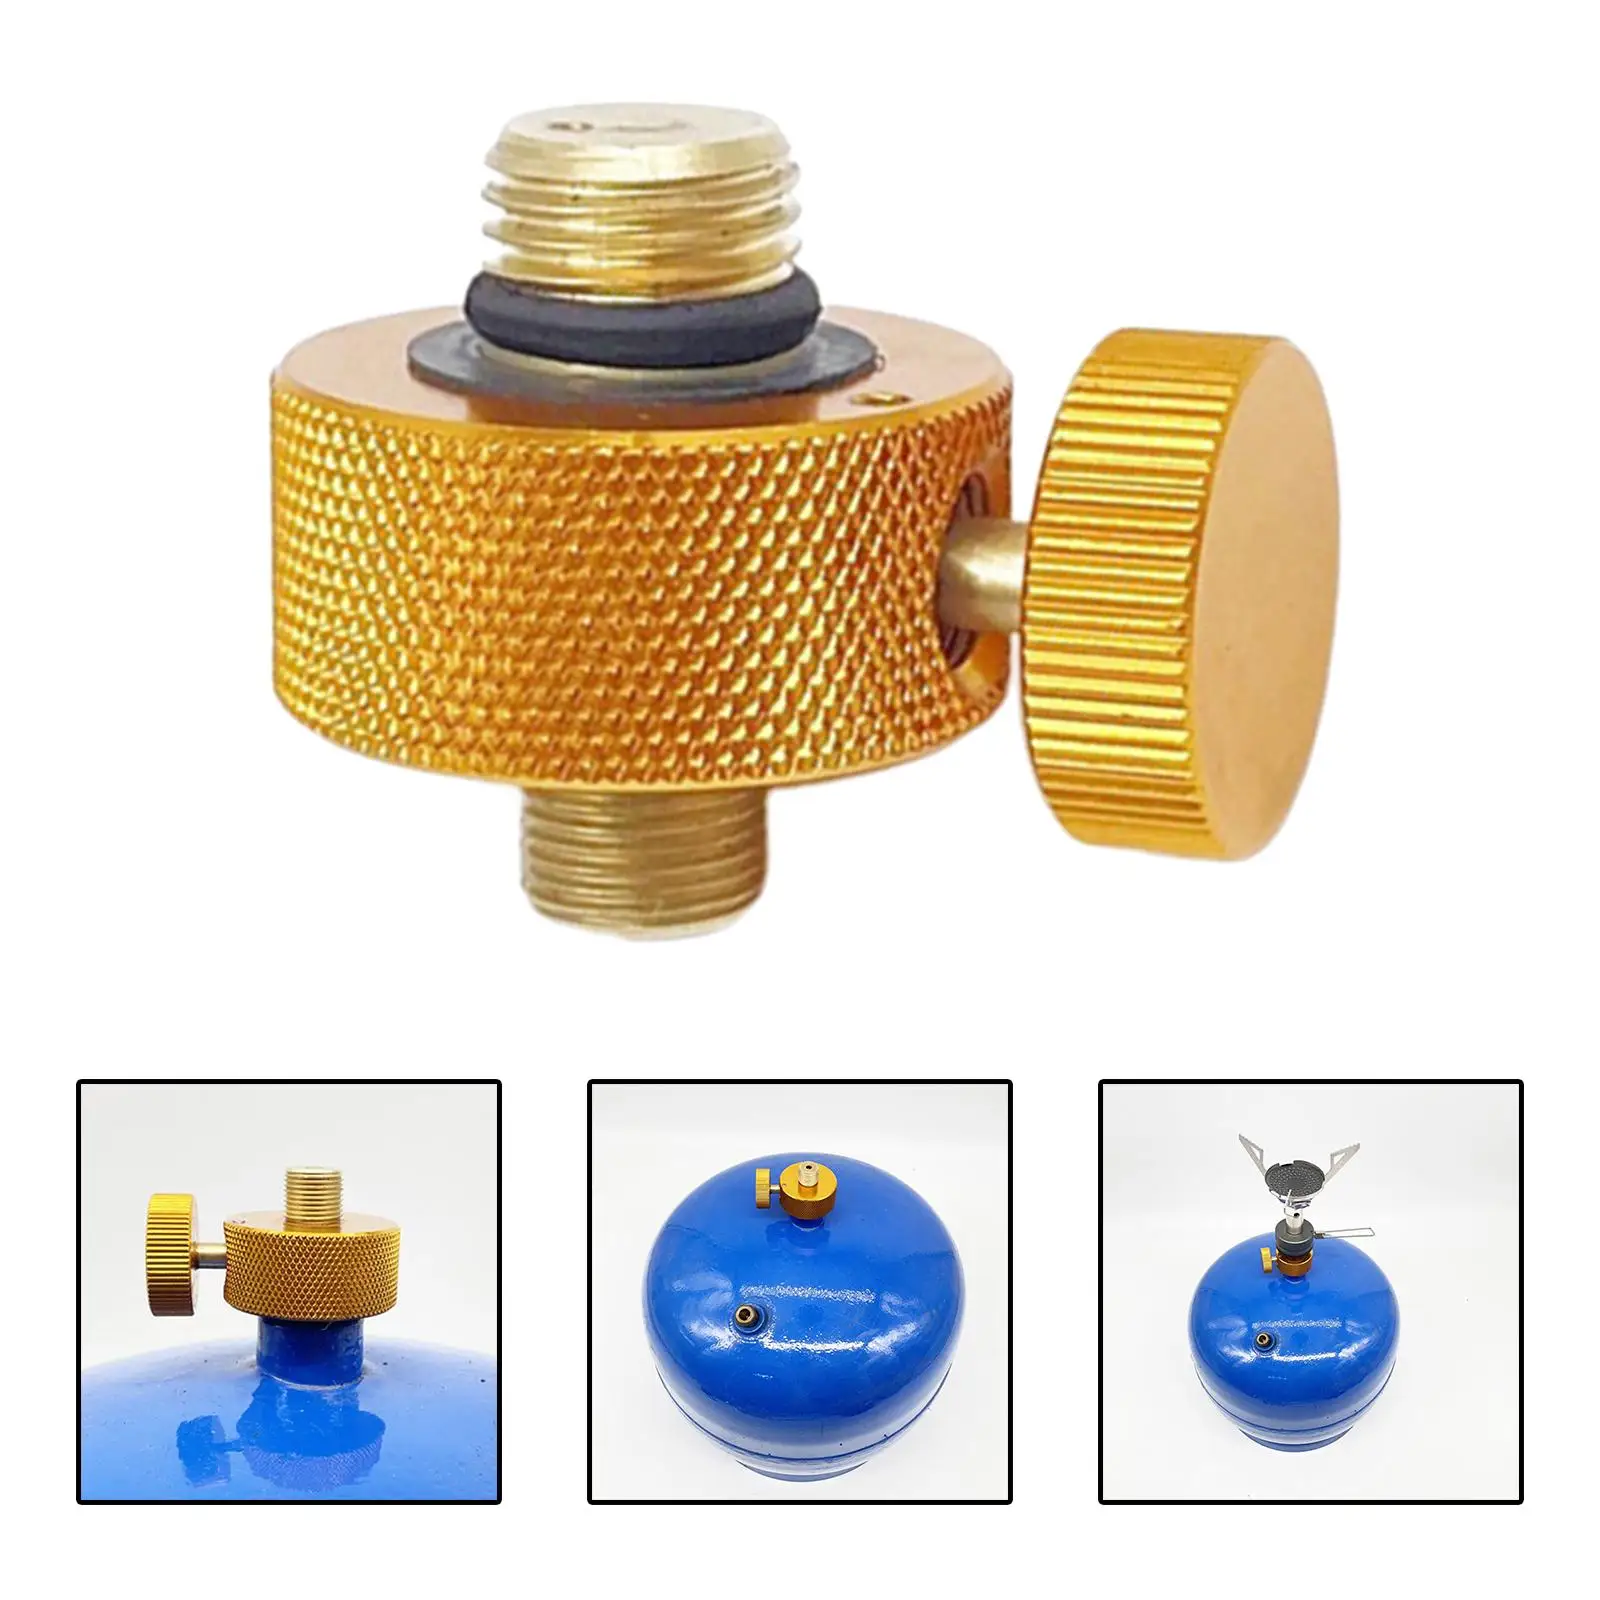 Camping Furnace Adapter Gas Cylinder Adapter Connection Convertor Metal Adapter Split Type Connector for Backpacking Hiking